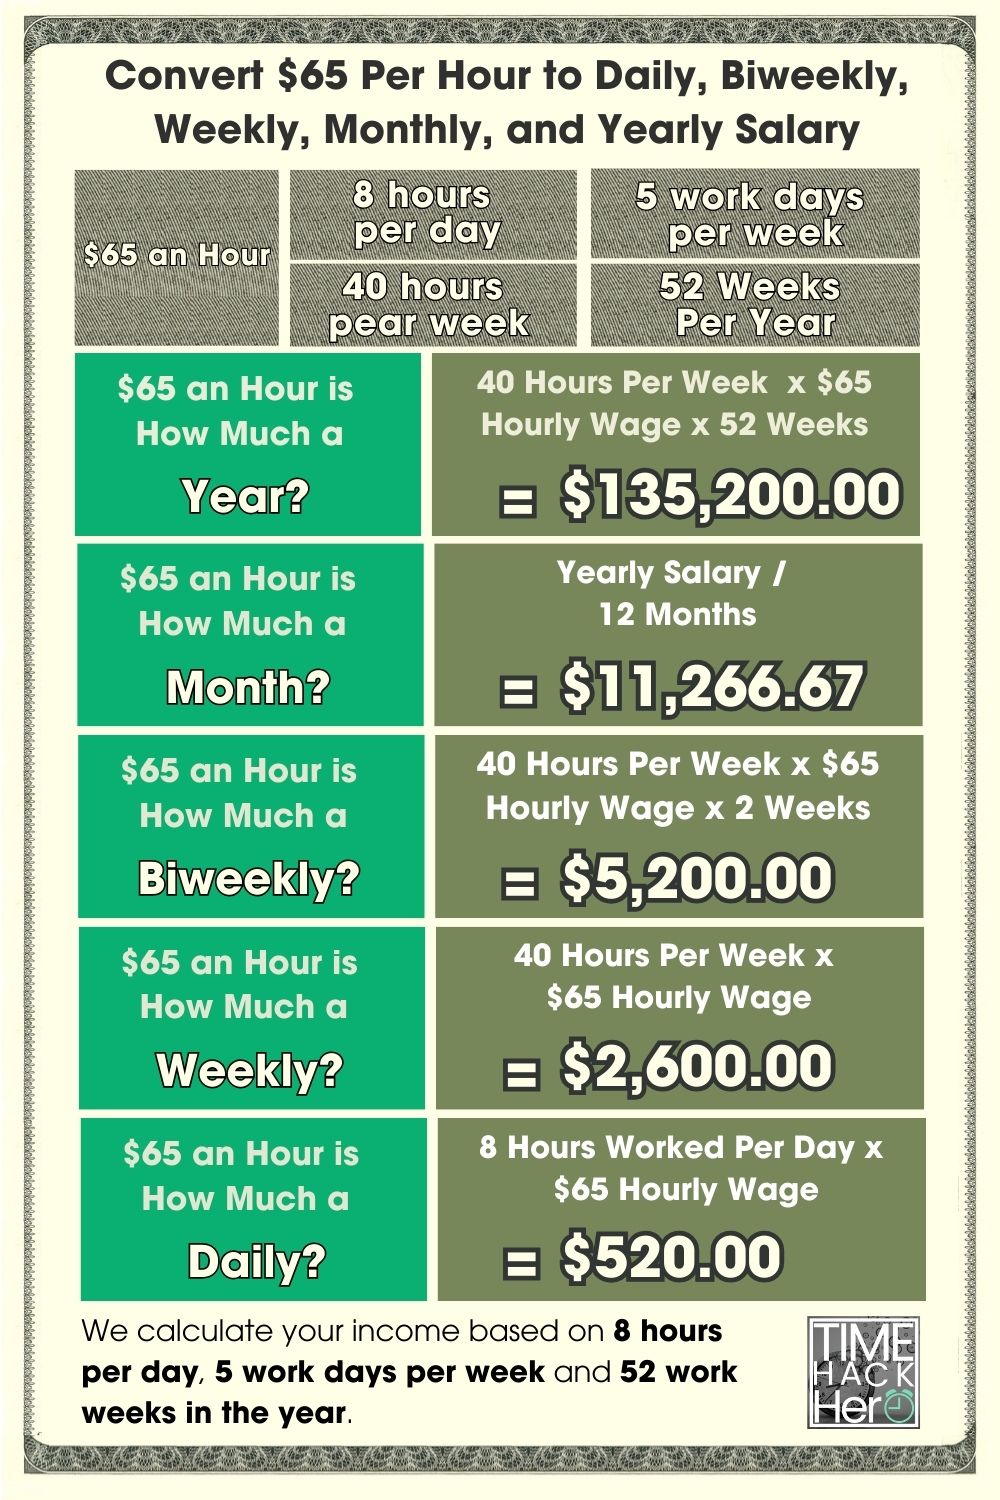 Convert $65 Per Hour to Daily, Biweekly, Weekly, Monthly, and Yearly Salary